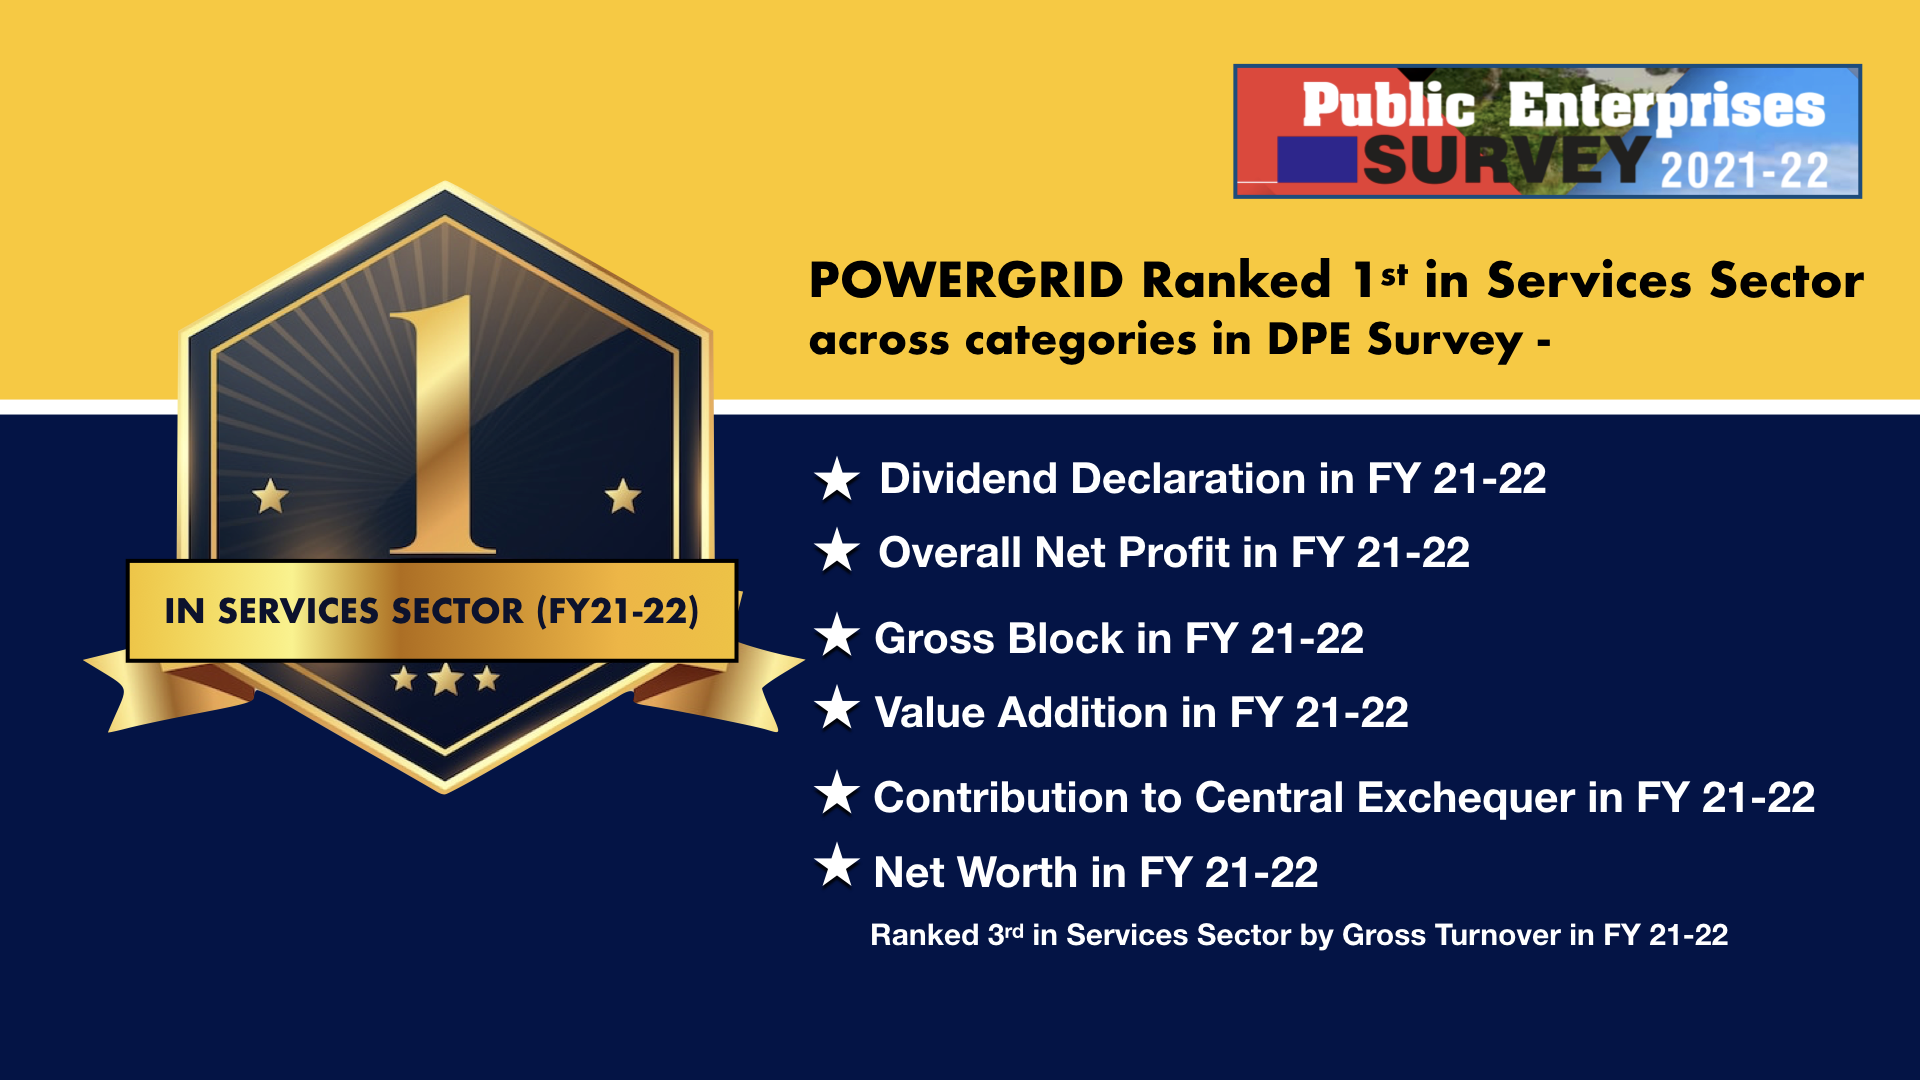 POWERGRID Ranked 1st in Services Sector across categories in PE Survey 2021-22